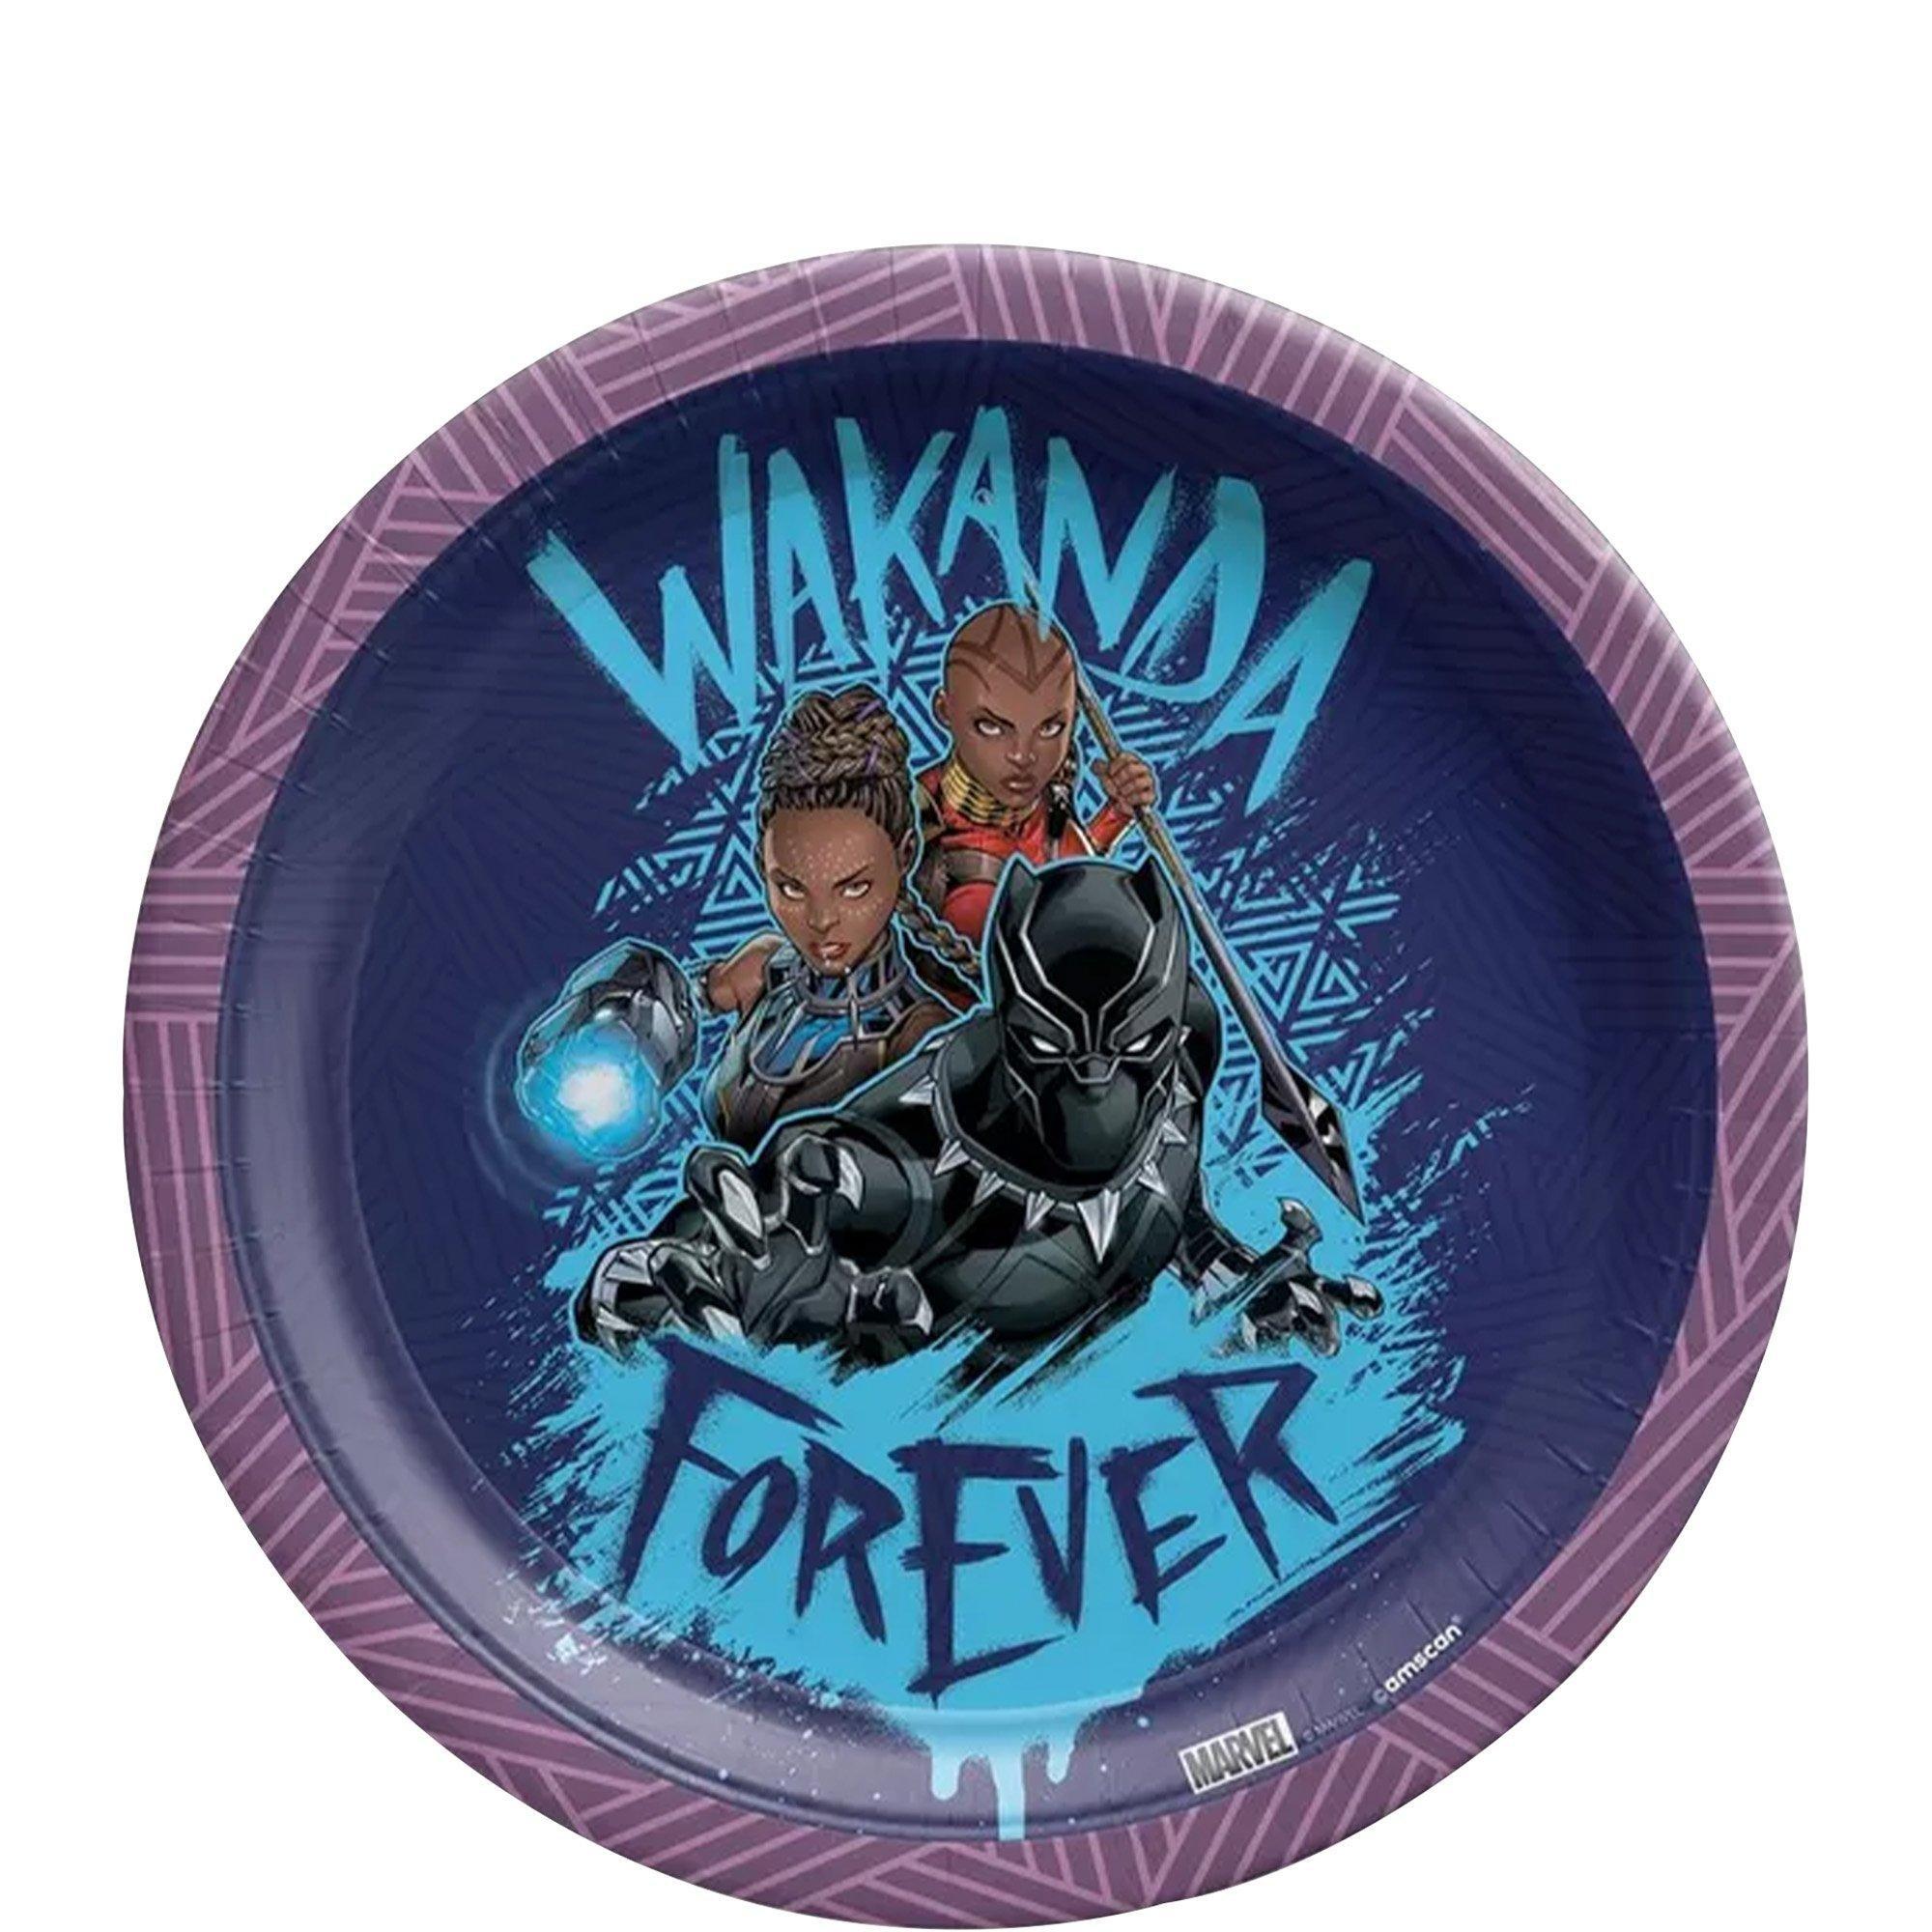 Black Panther Wakanda Forever Birthday Party Supplies Pack for 16 Guests - Kit Includes Plates, Napkins, Cups, Table Covers, Candle, Banner Decoration & Favor Cup